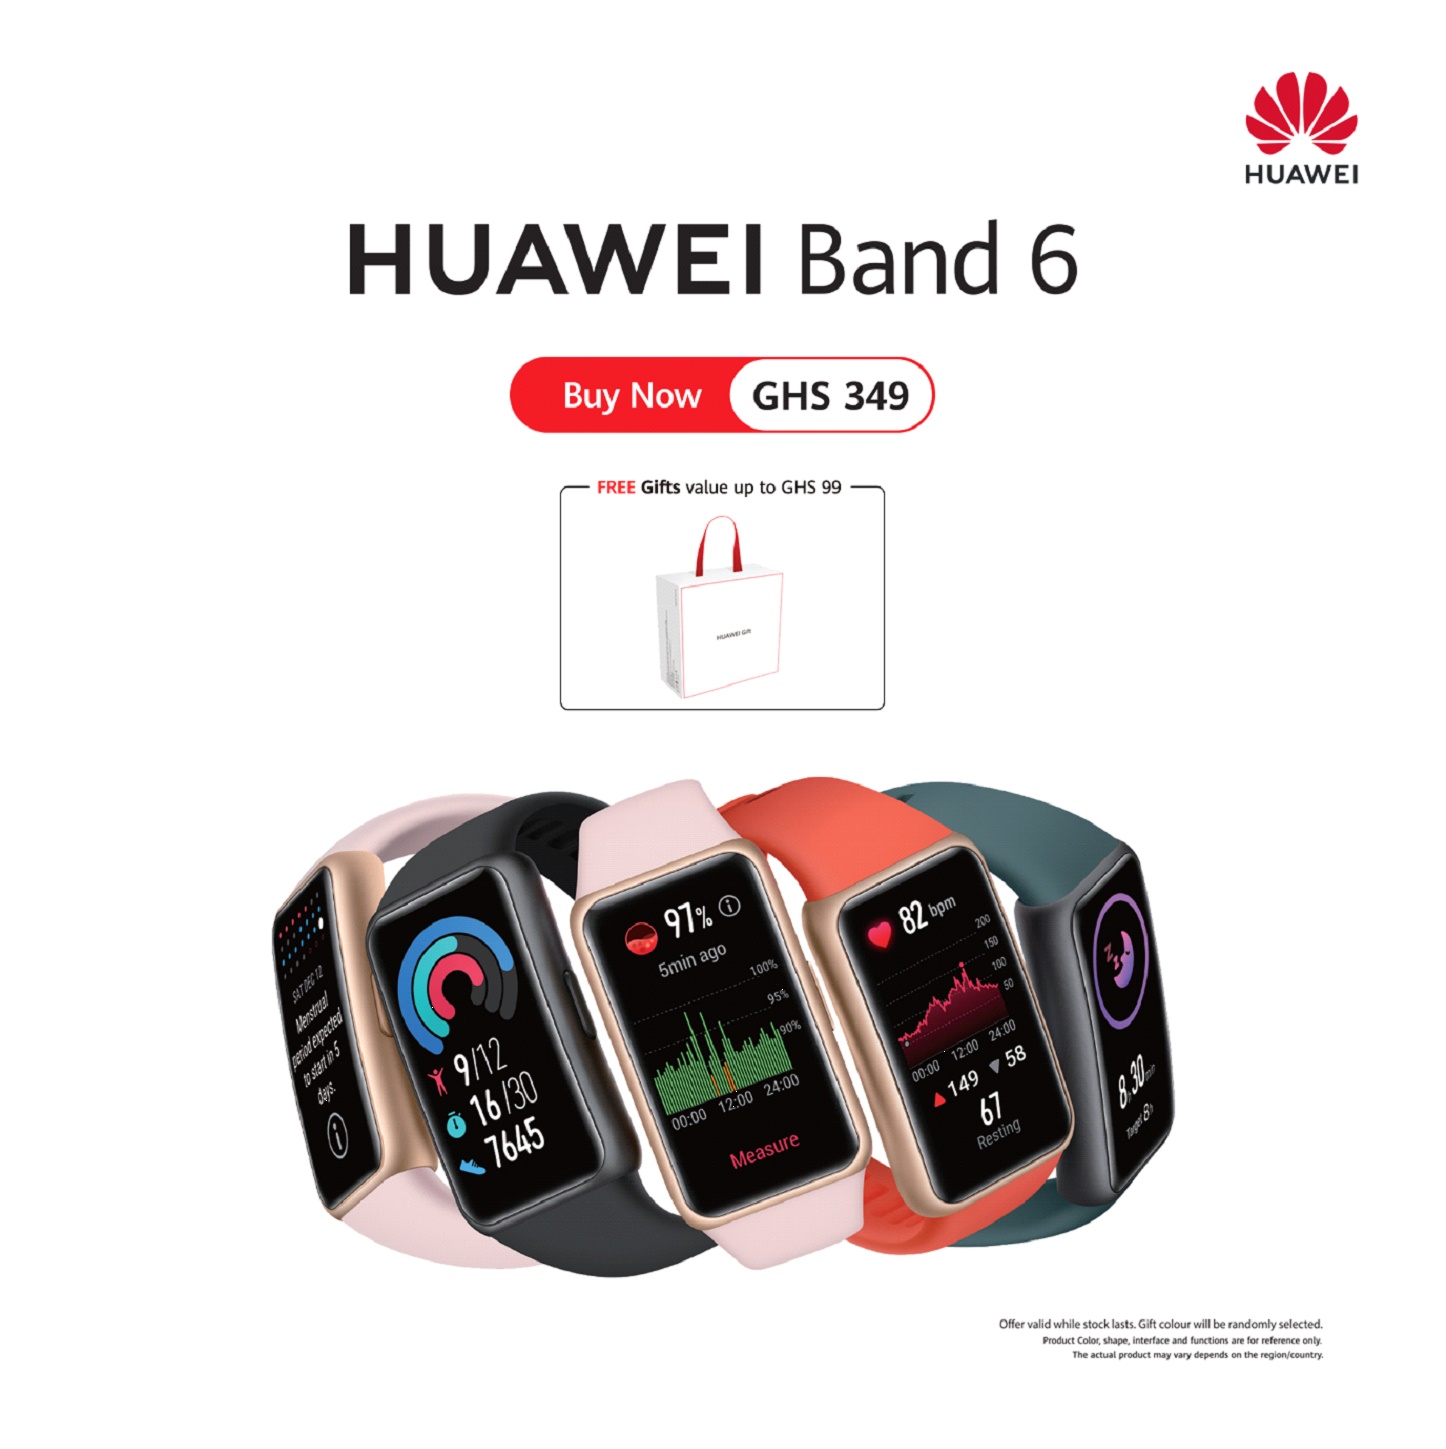 Huawei Band 6 brings together Key smartwatch features and doesn’t break the bank